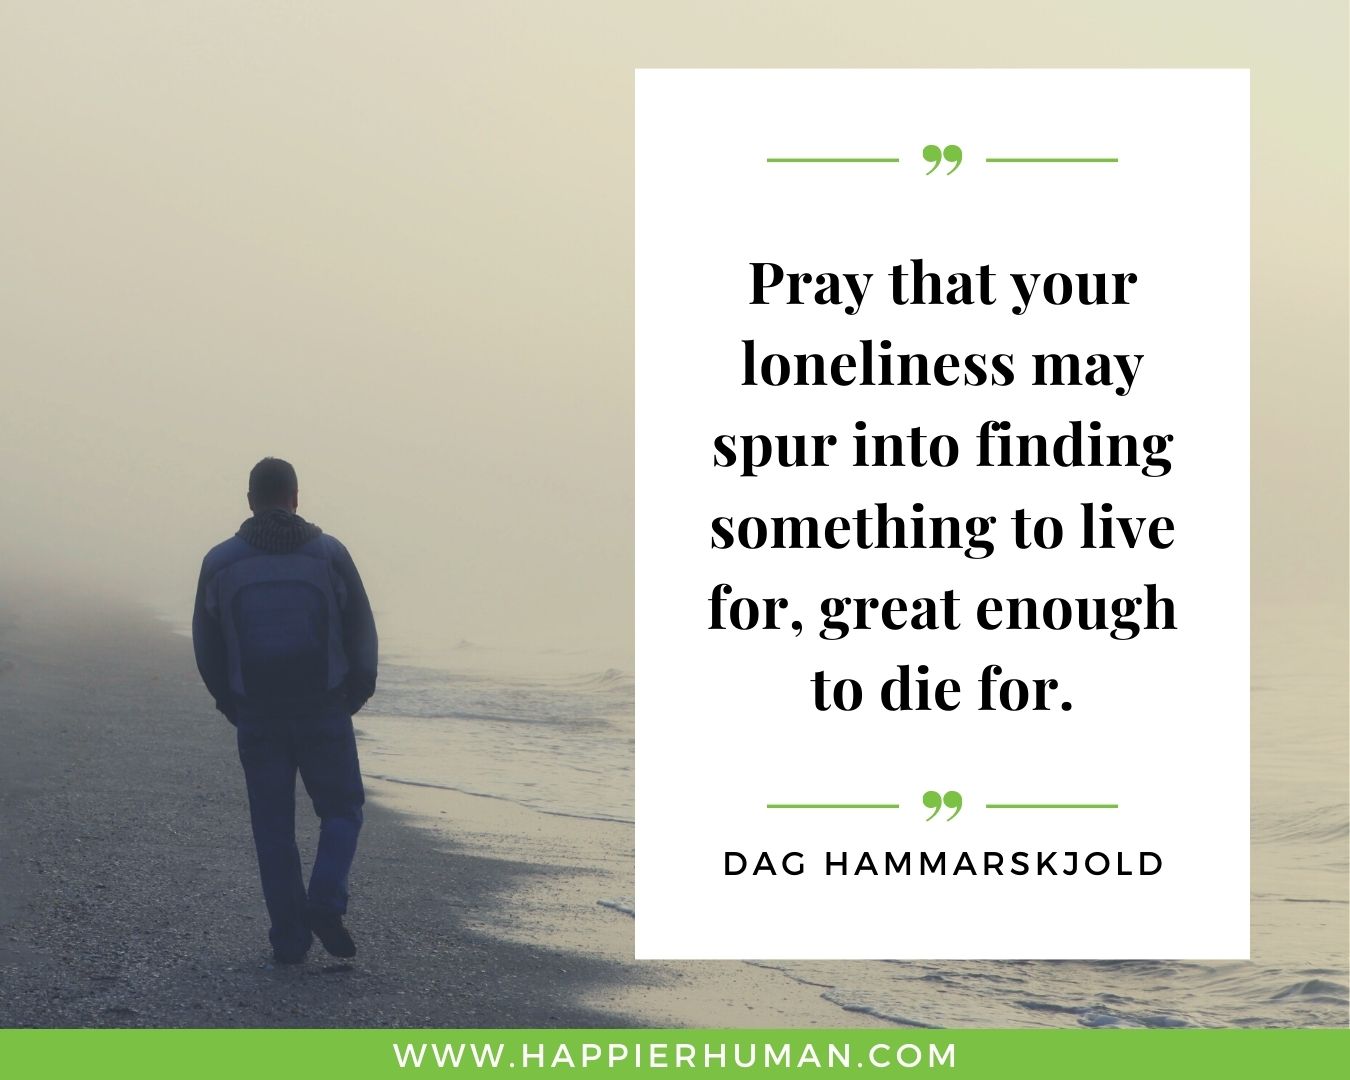 Loneliness Quotes - “Pray that your loneliness may spur into finding something to live for, great enough to die for.” – Dag Hammarskjold